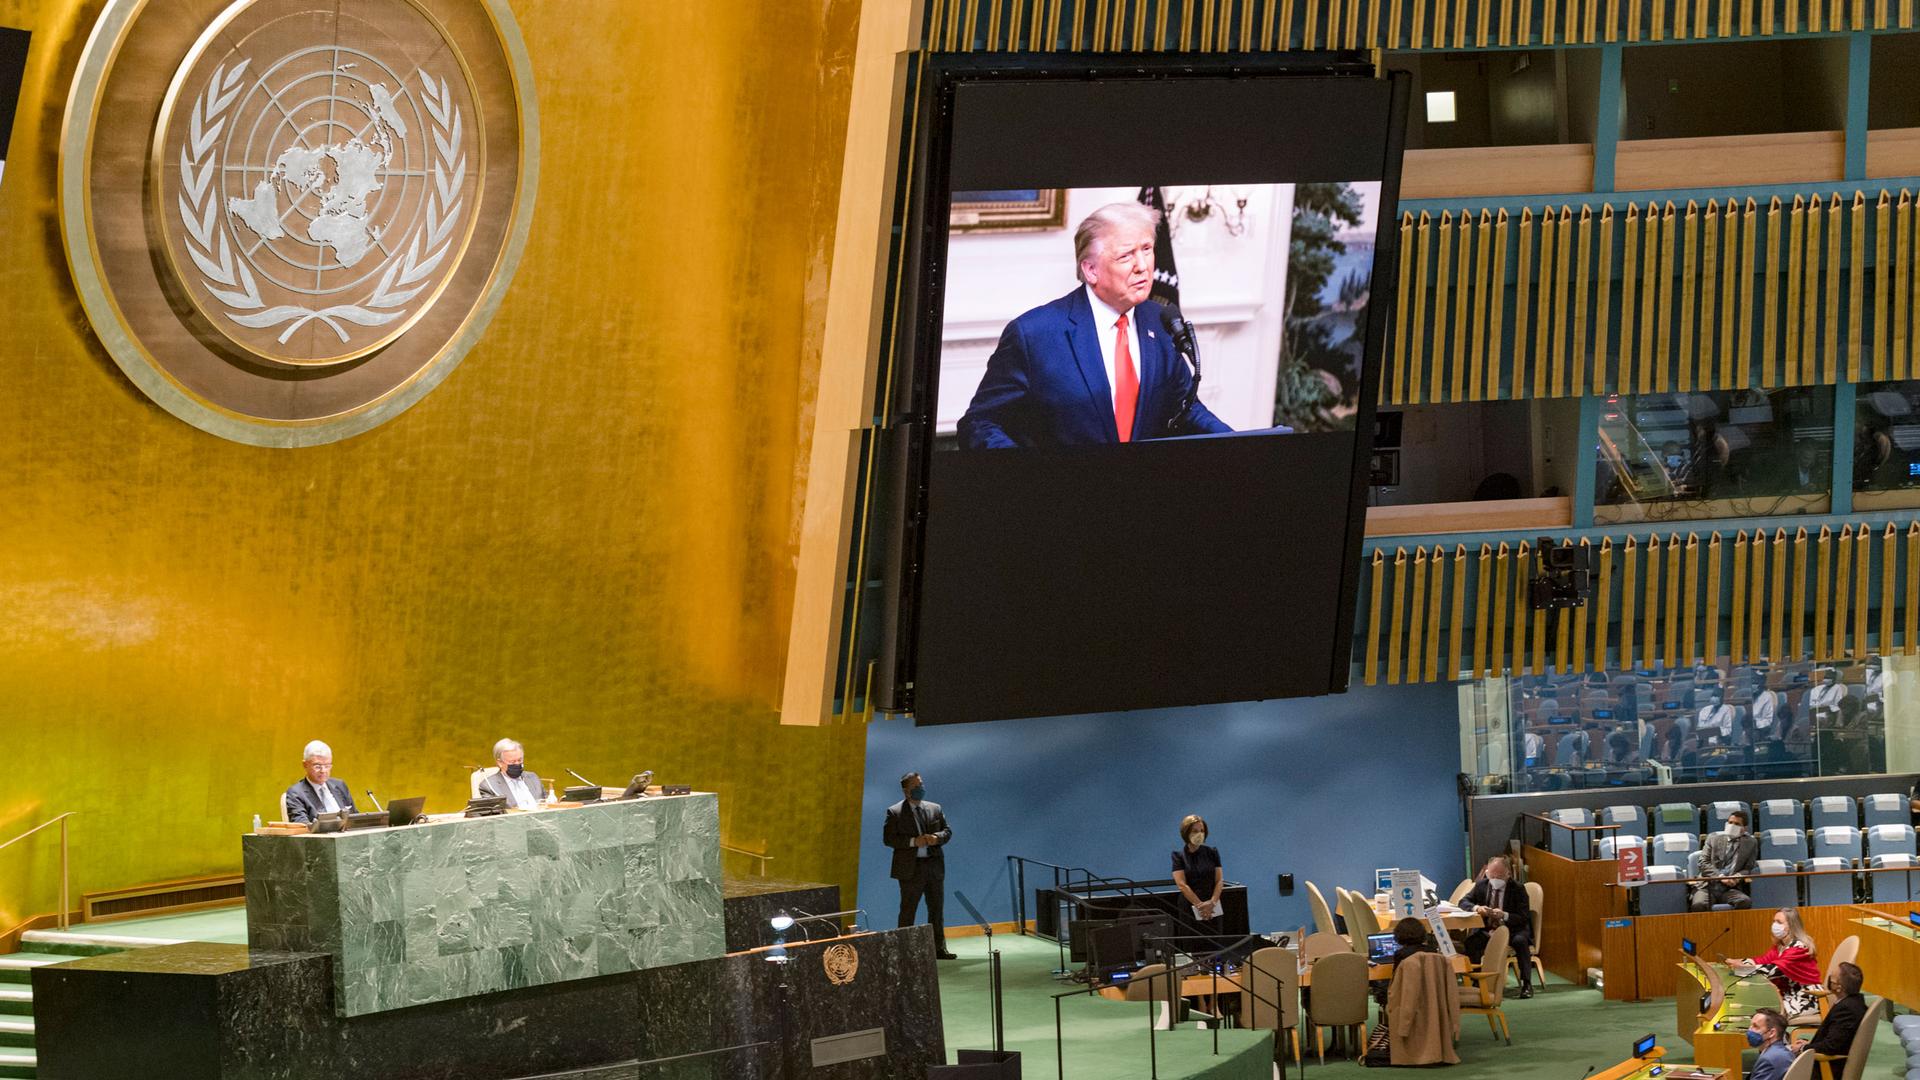 US President Donald Trump, shown on a large video screen against a gold leaf wall and the United Nations symbol.